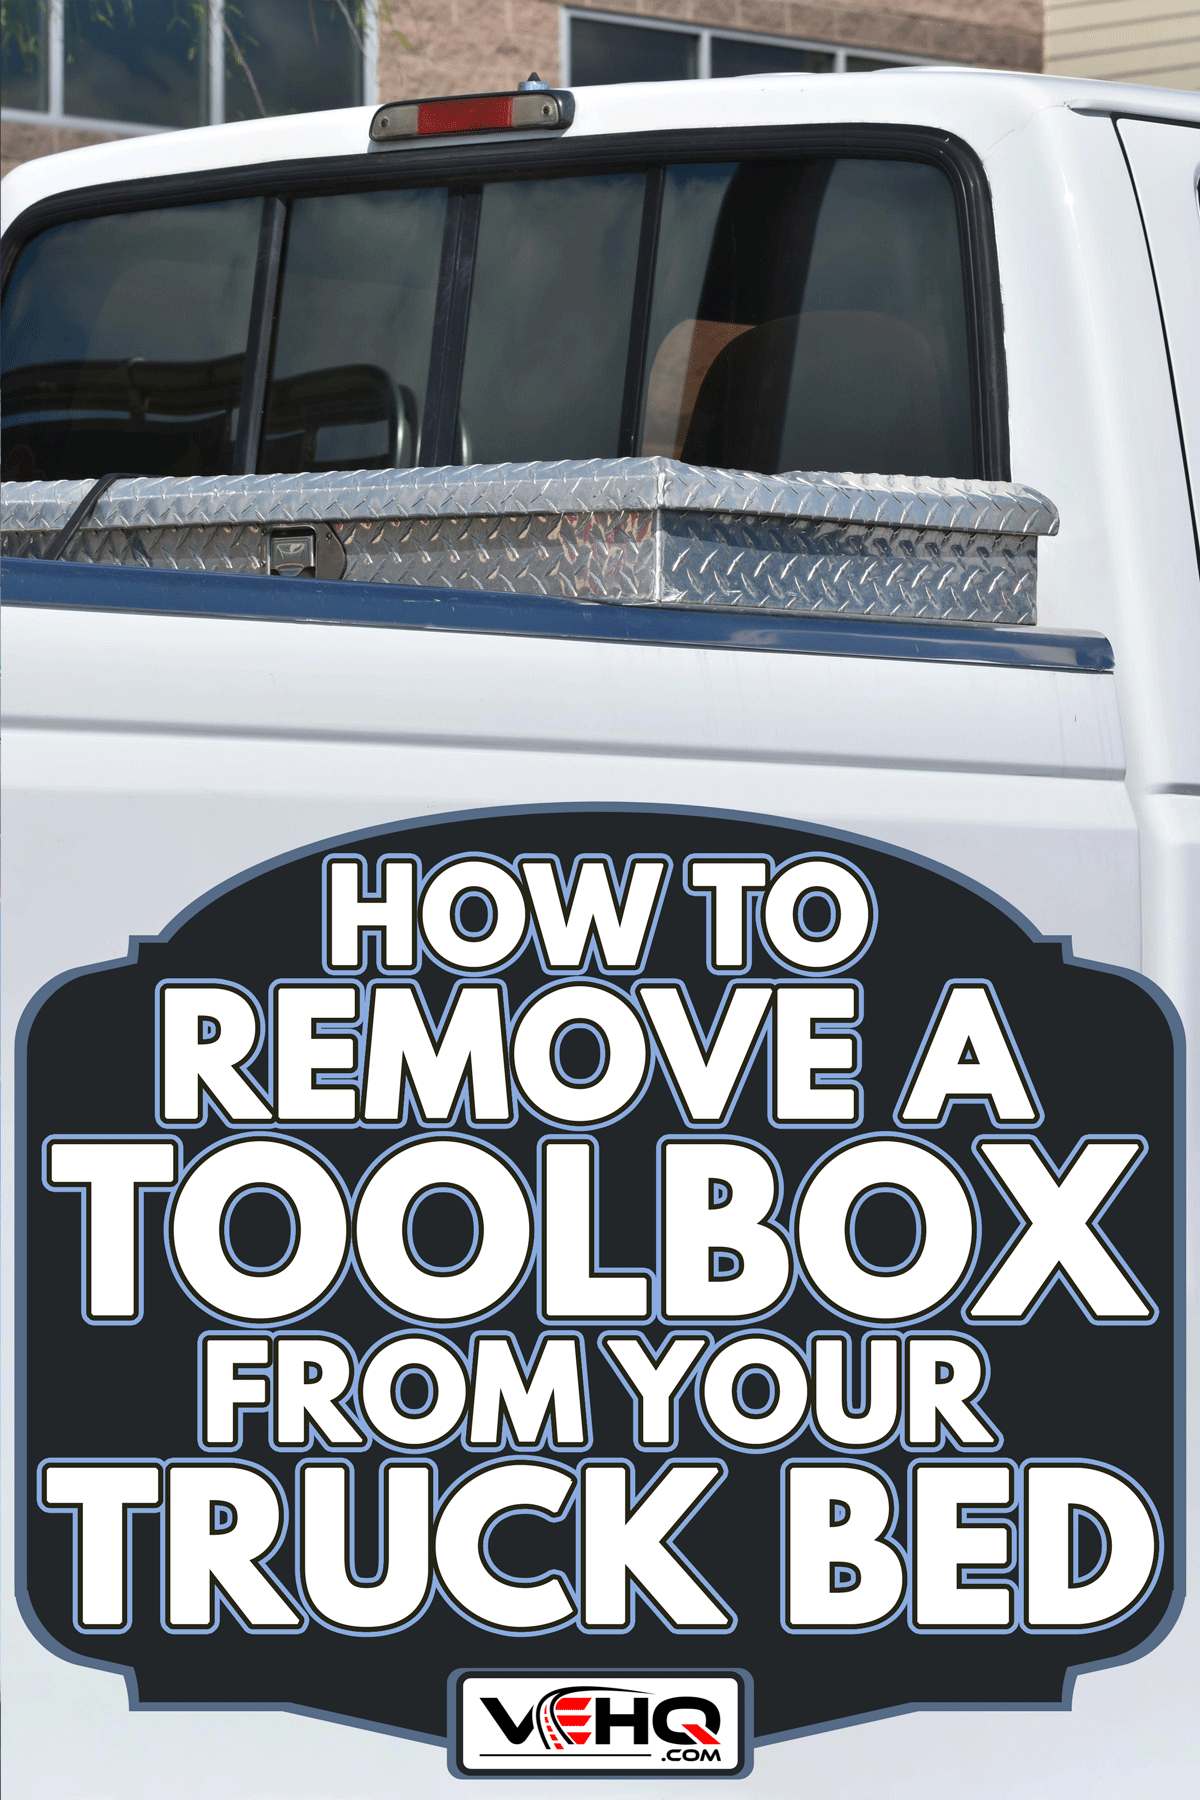 Truck bed tool box, How To Remove A Toolbox From Your Truck Bed